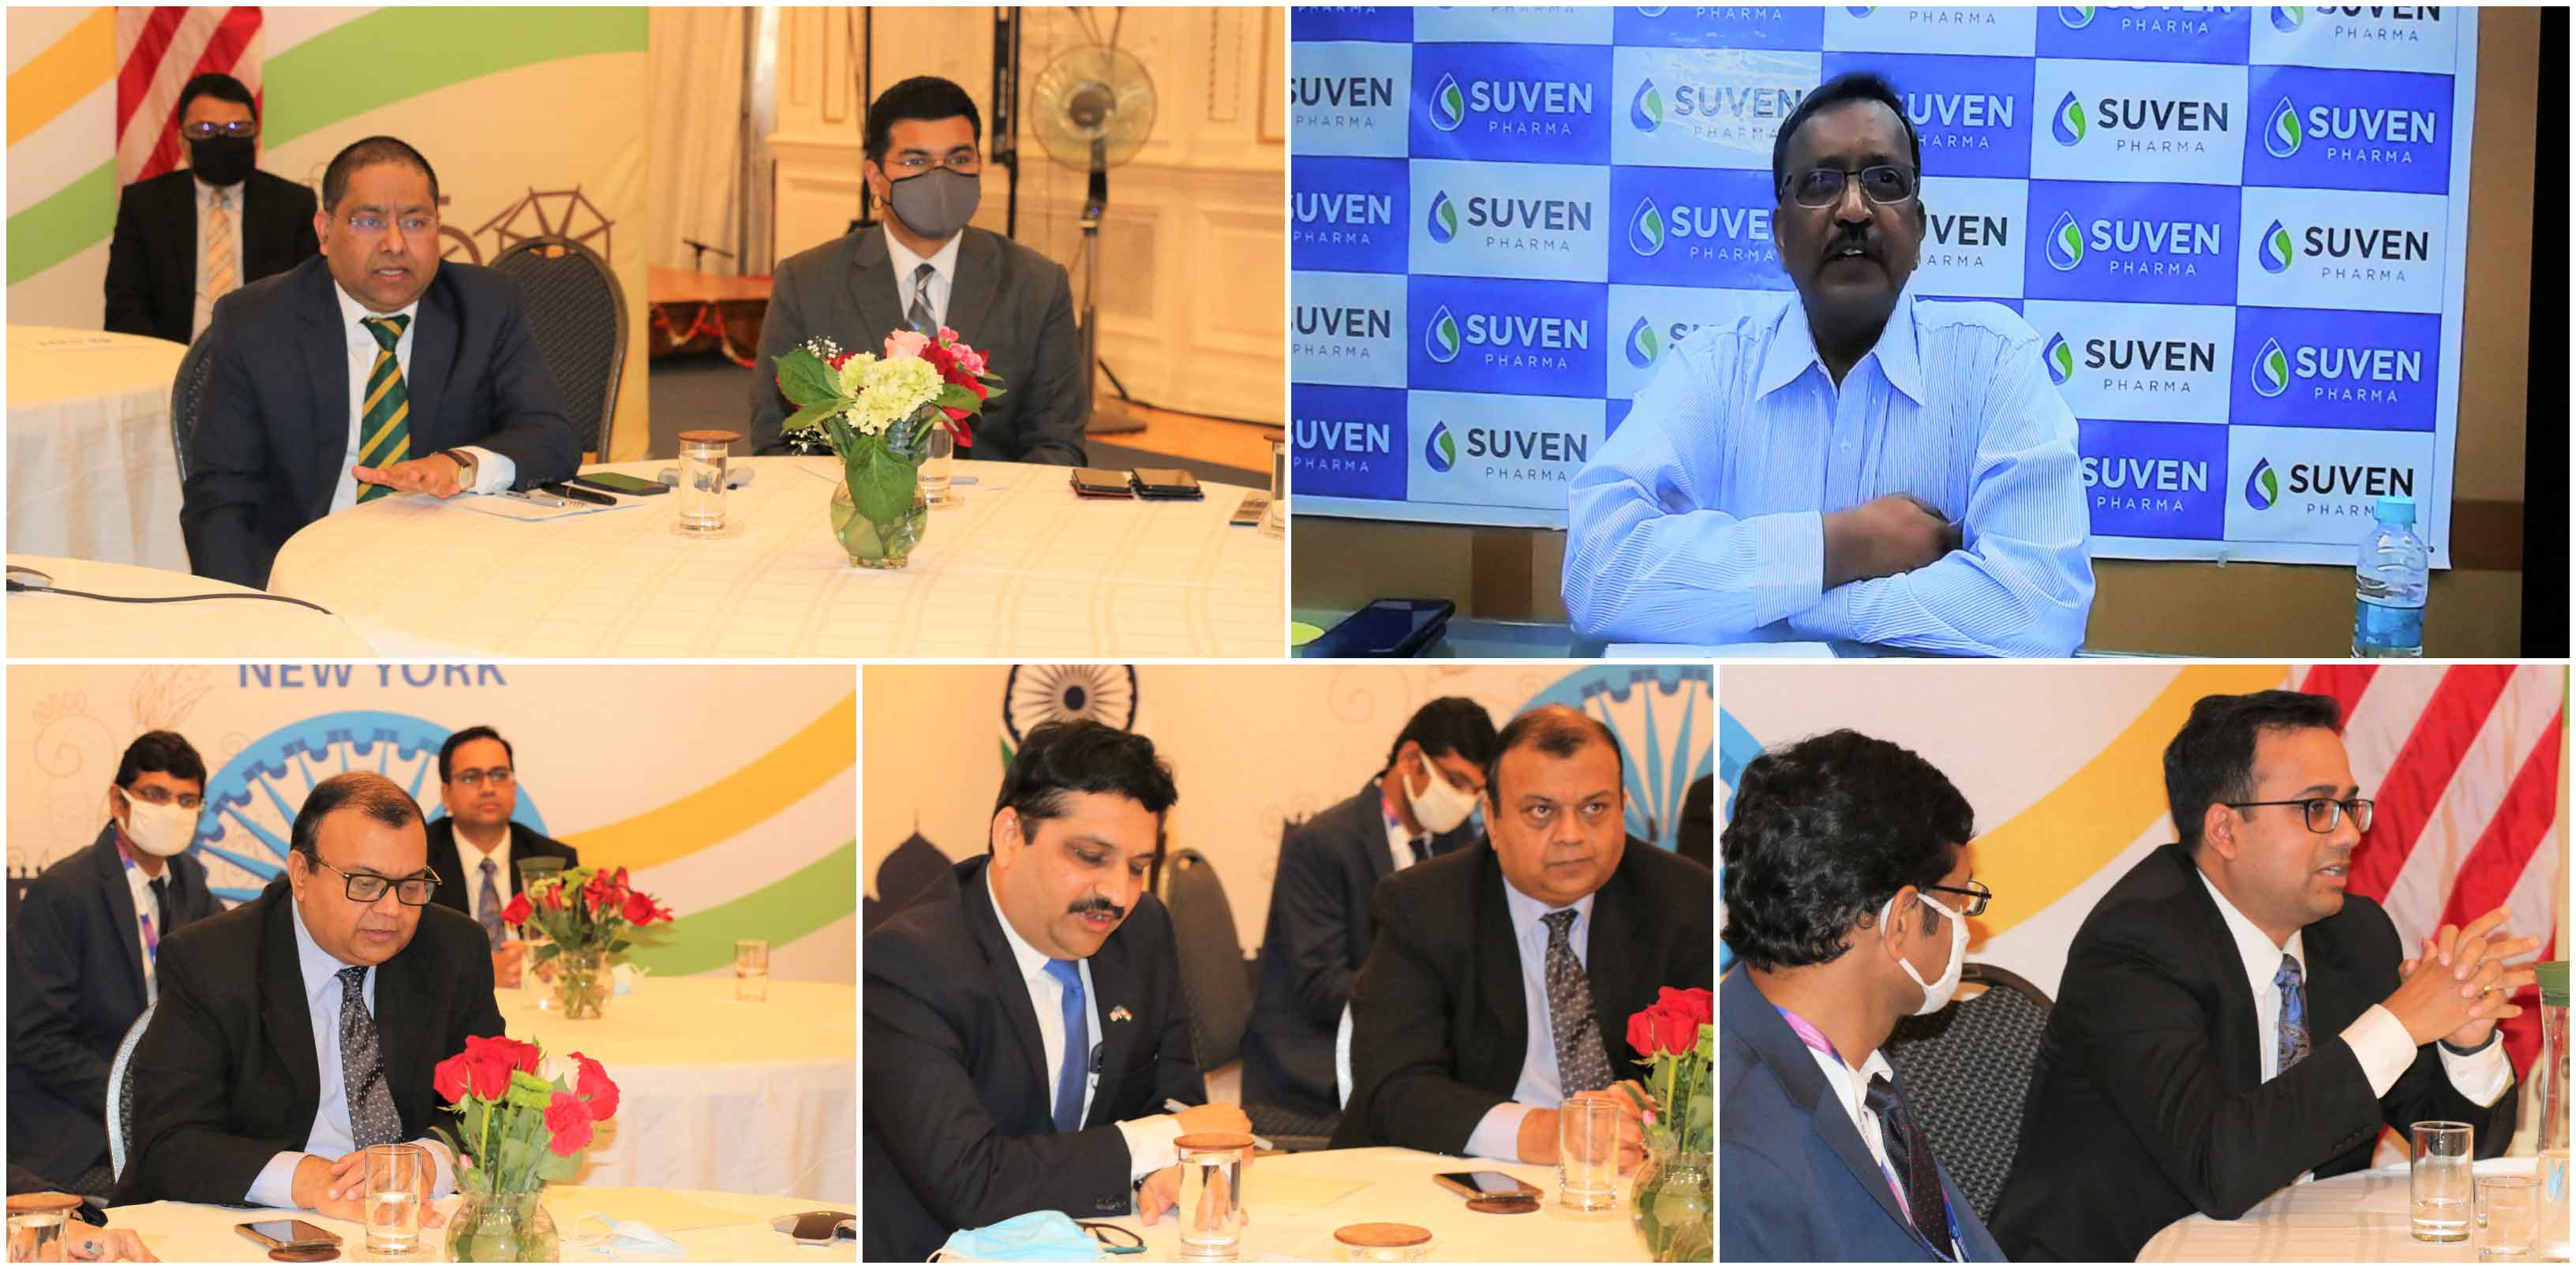  Consulate General of India, New York partnered with State Bank of India, New York to organize a panel discussion on opportunities in the pharma sector in India